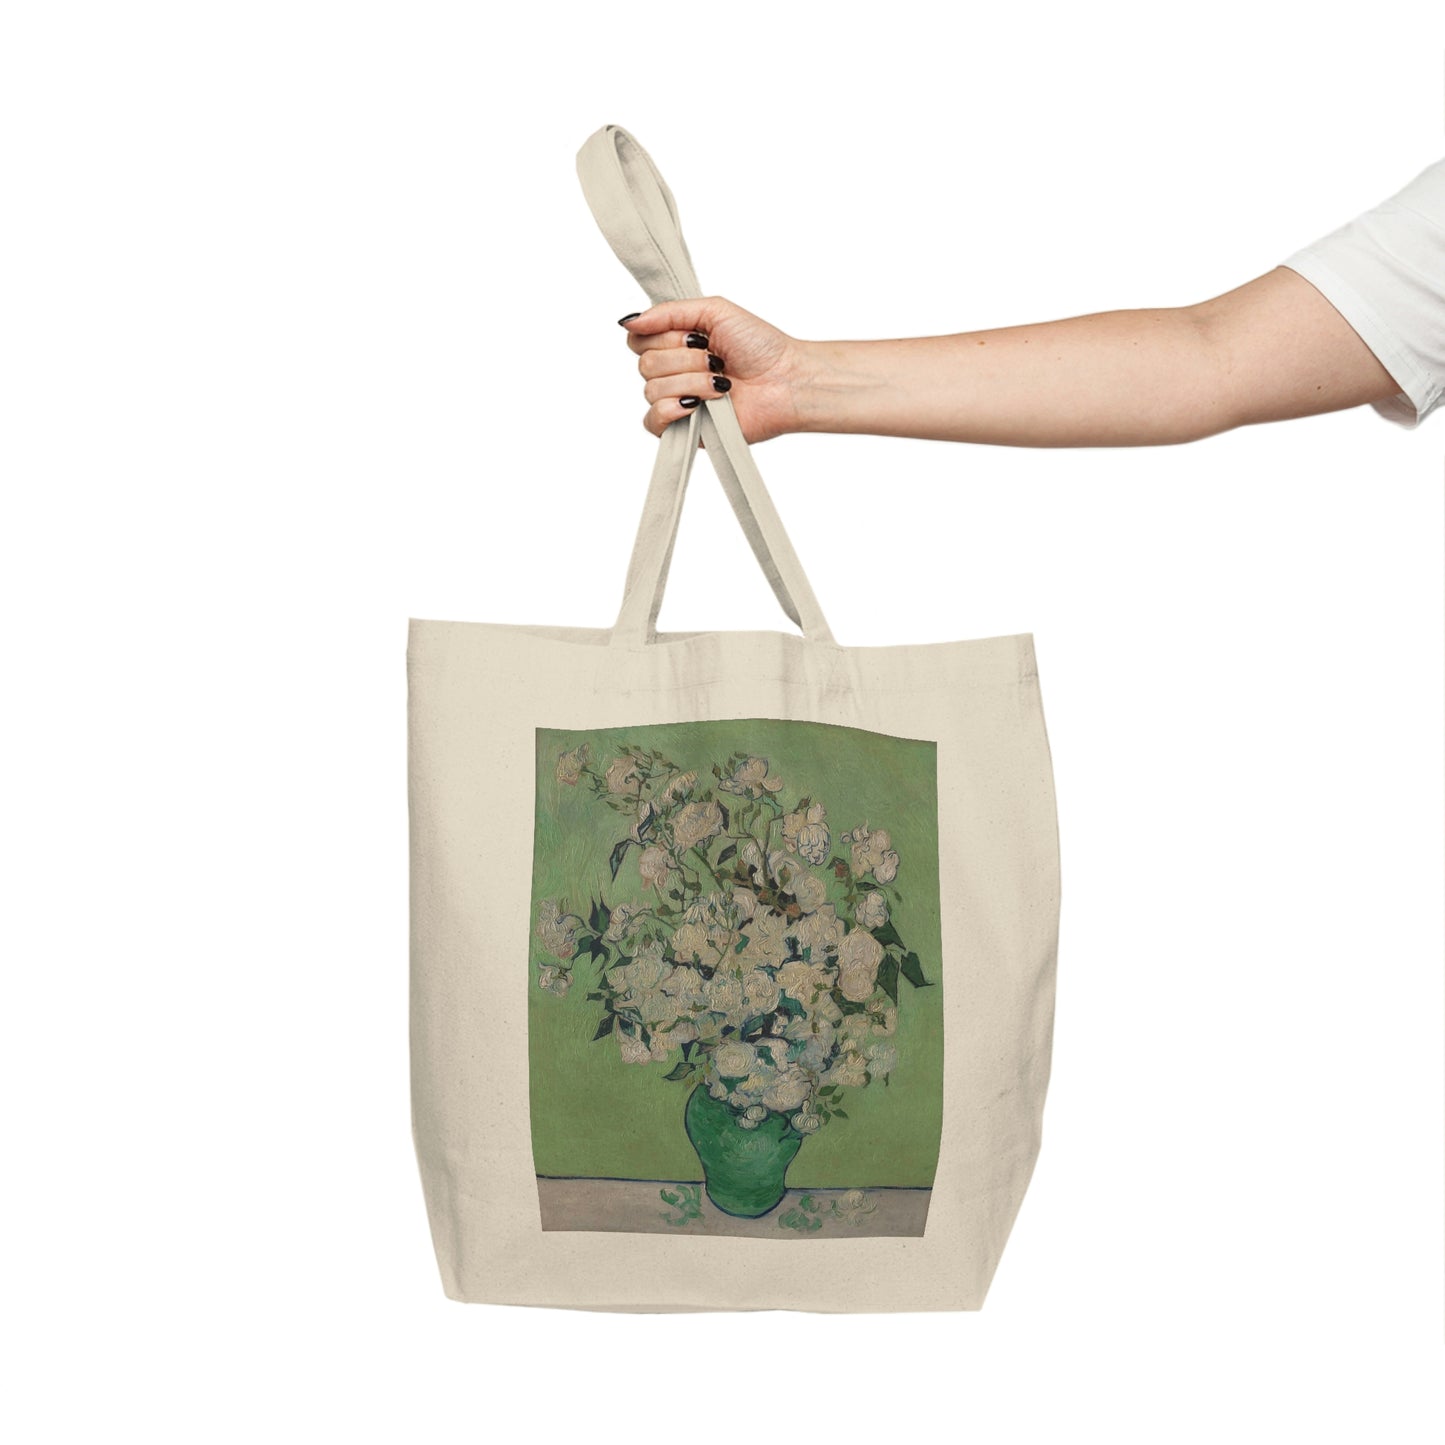 Roses - Vincent Van Gogh - 1890 - Canvas Shopping Tote